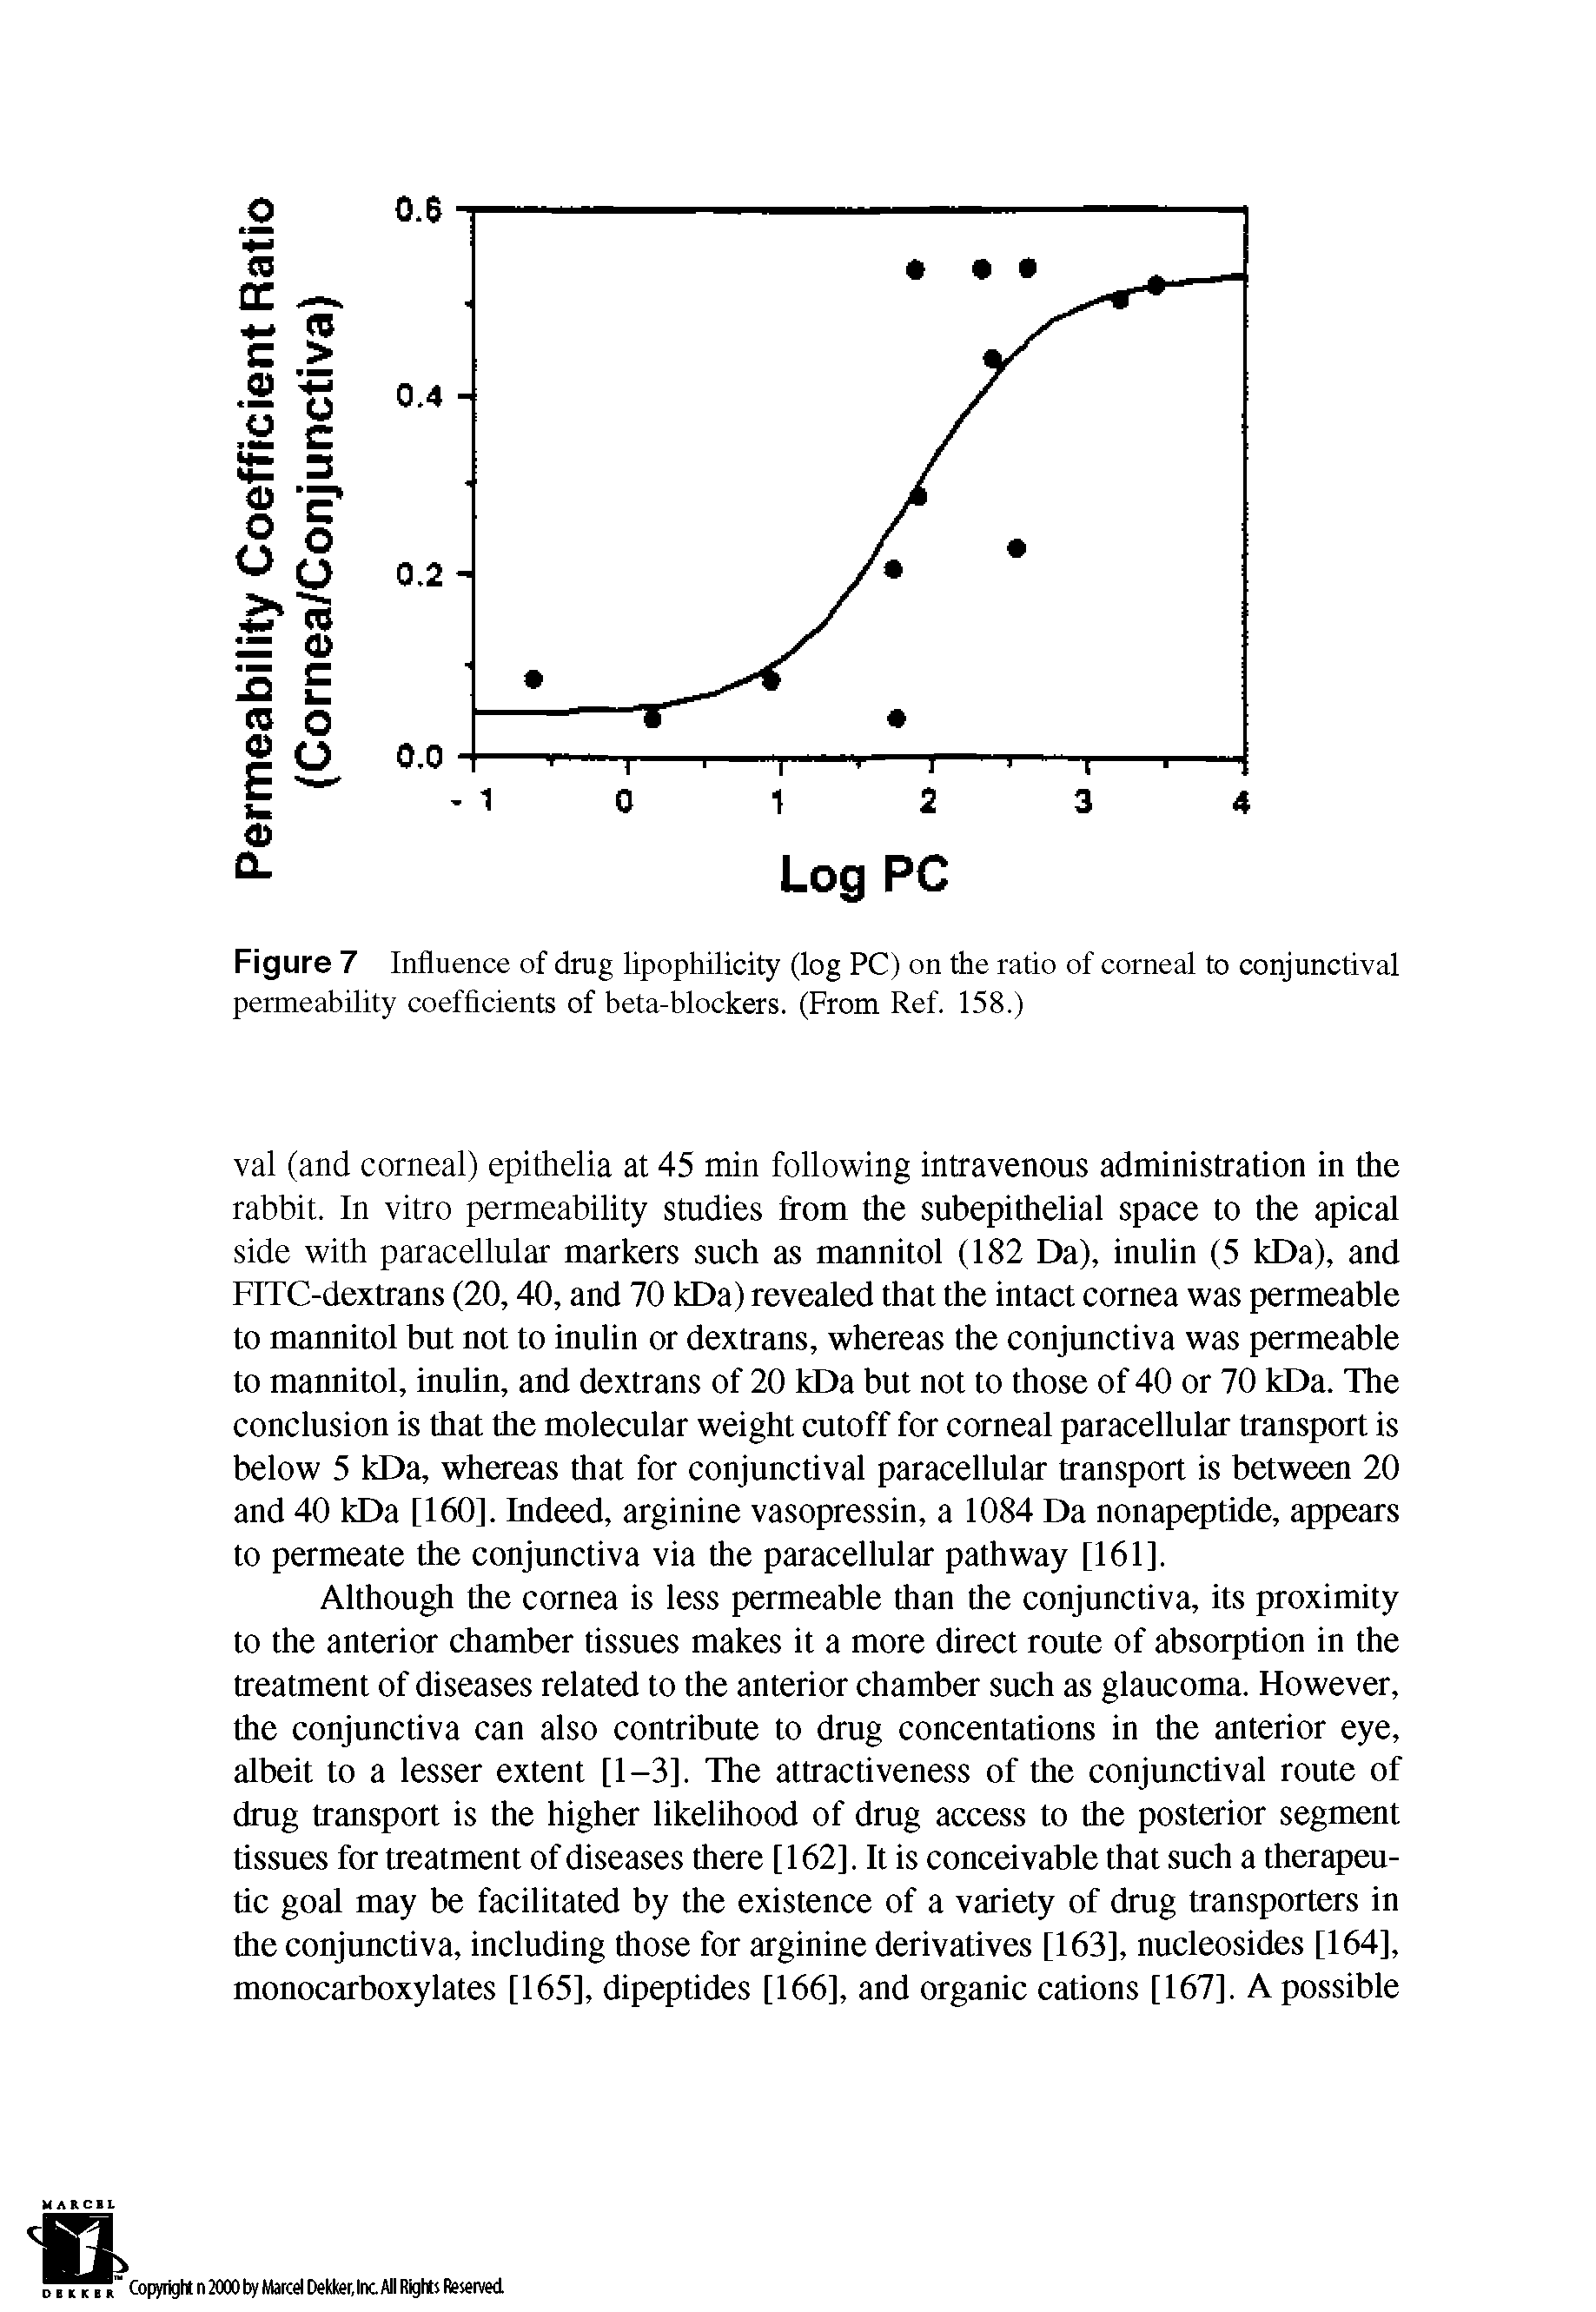 Figure 7 Influence of drug lipophilicity (log PC) on the ratio of corneal to conjunctival permeability coefficients of beta-blockers. (From Ref. 158.)...